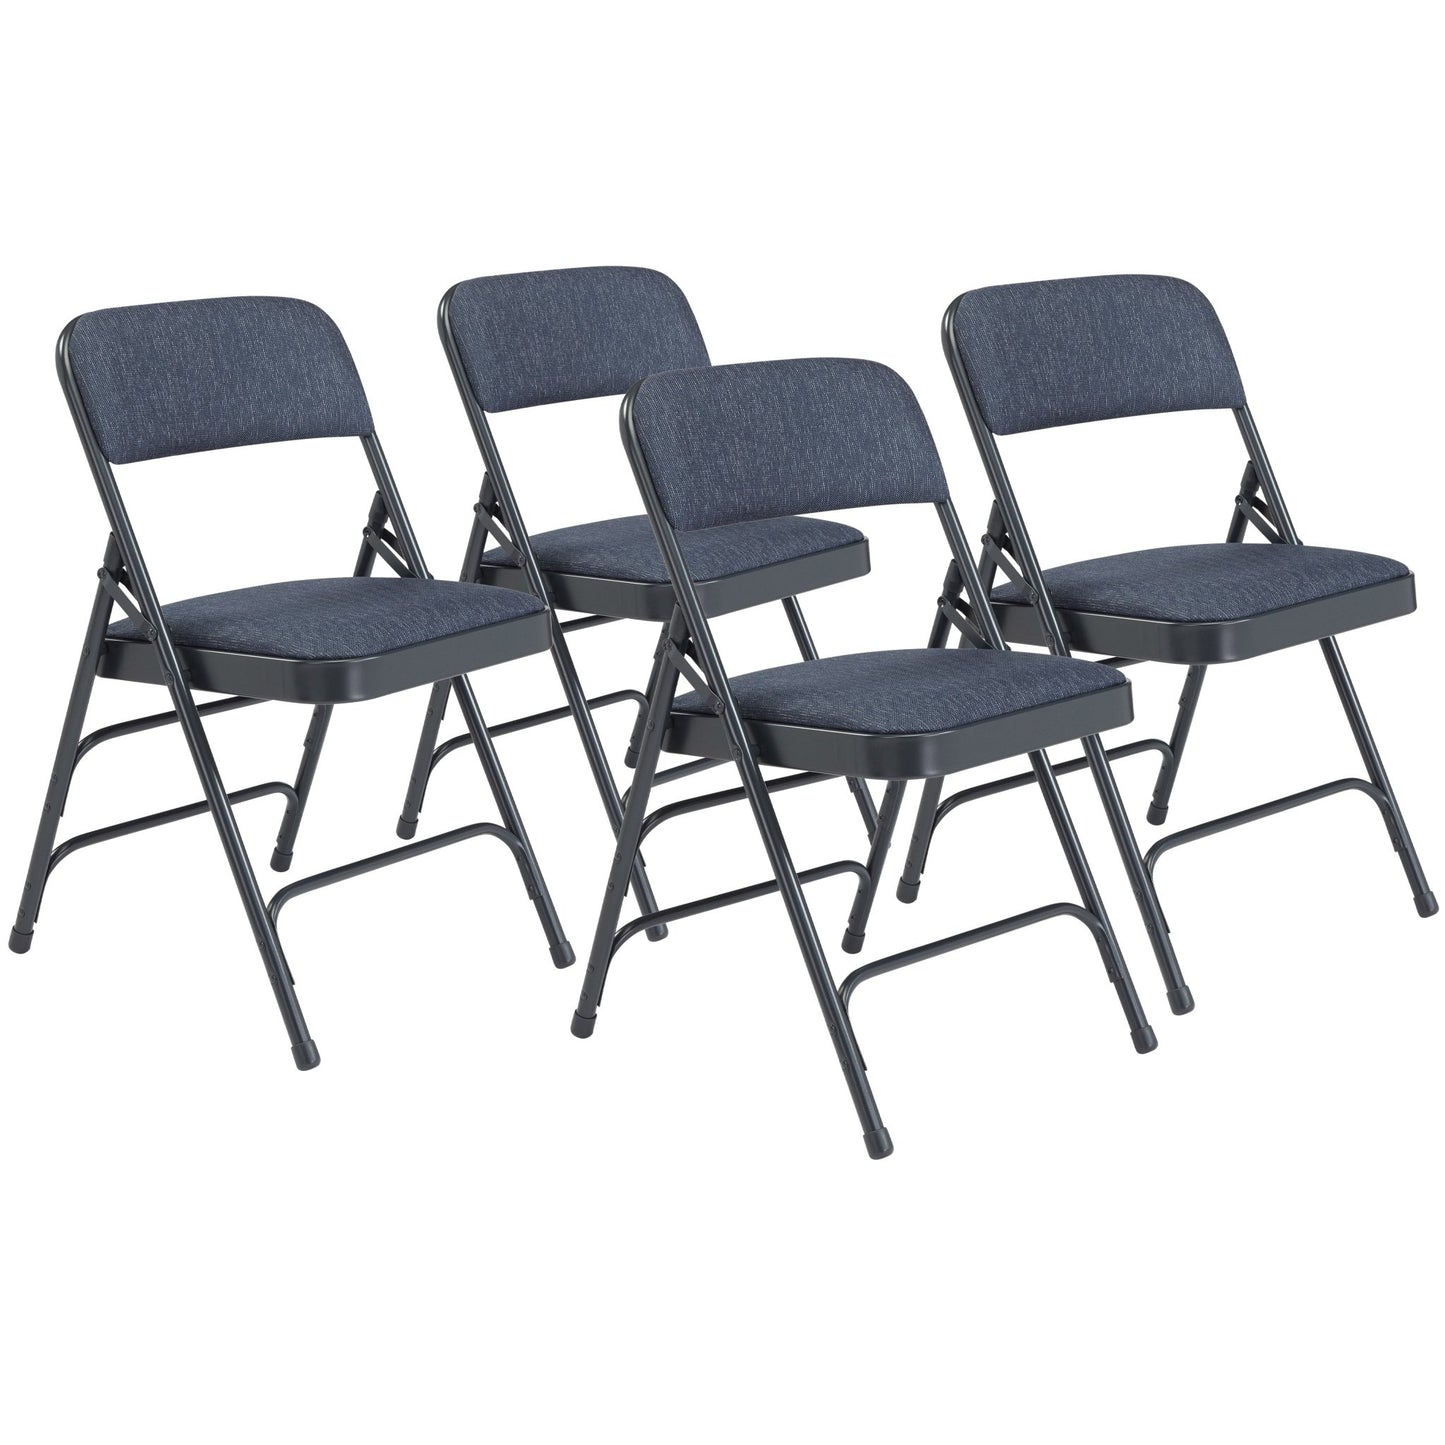 NPS 2300 Series Fabric Upholstered Premium Folding Chair Triple Brace Double Hinge (National Public Seating NPS-2300) - SchoolOutlet